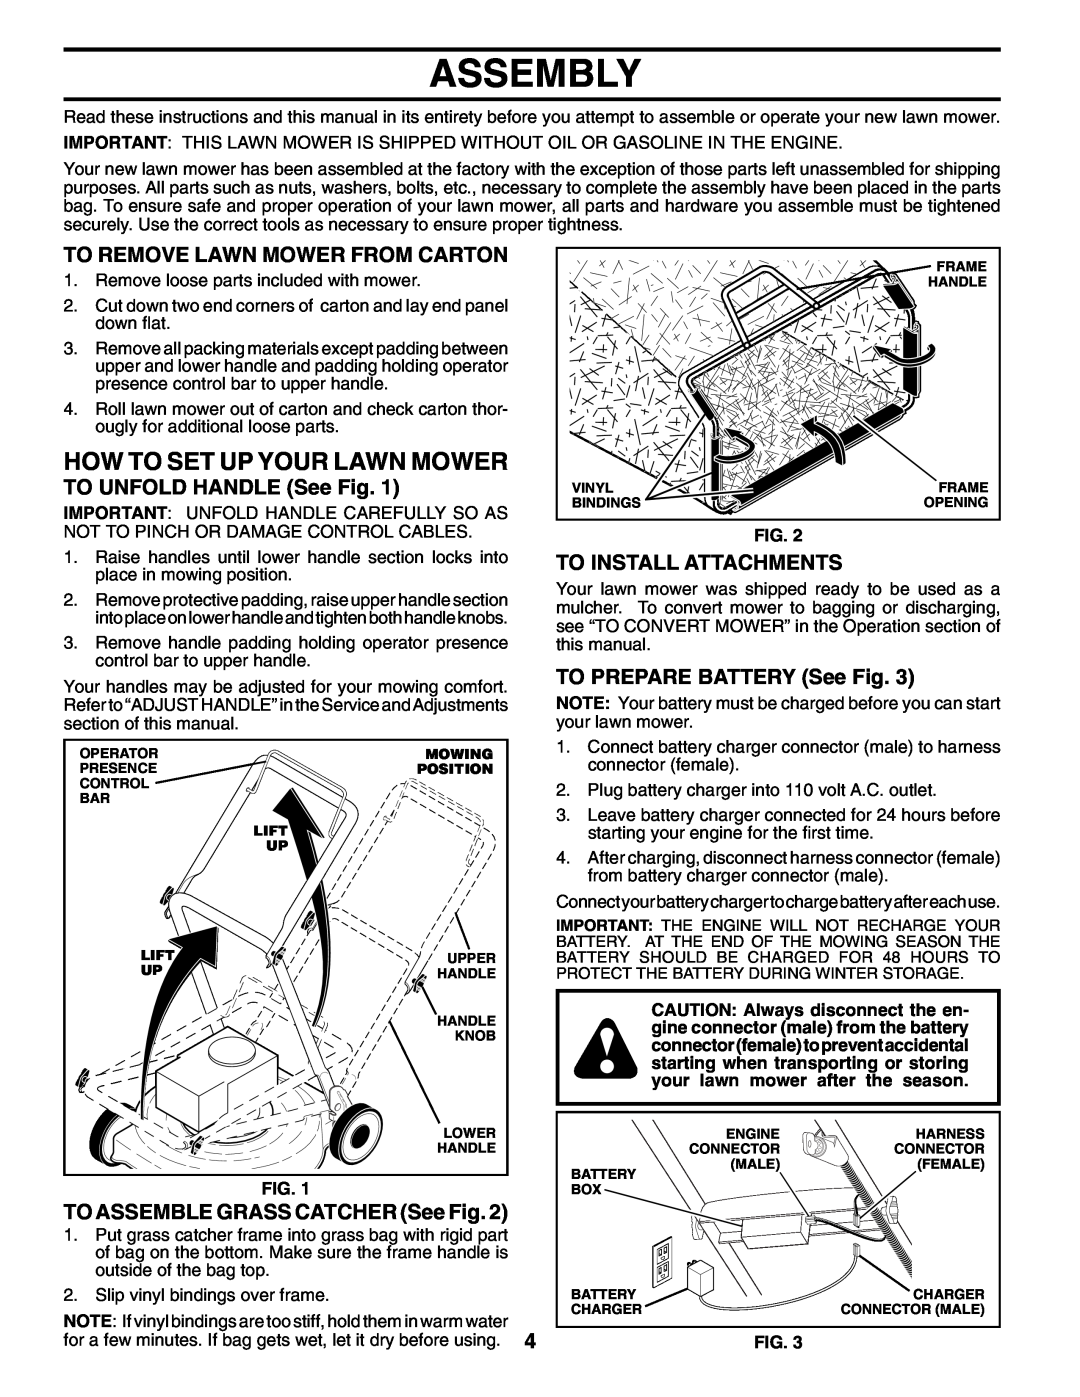 Husqvarna 65021ES Assembly, How To Set Up Your Lawn Mower, To Remove Lawn Mower From Carton, TO UNFOLD HANDLE See Fig 